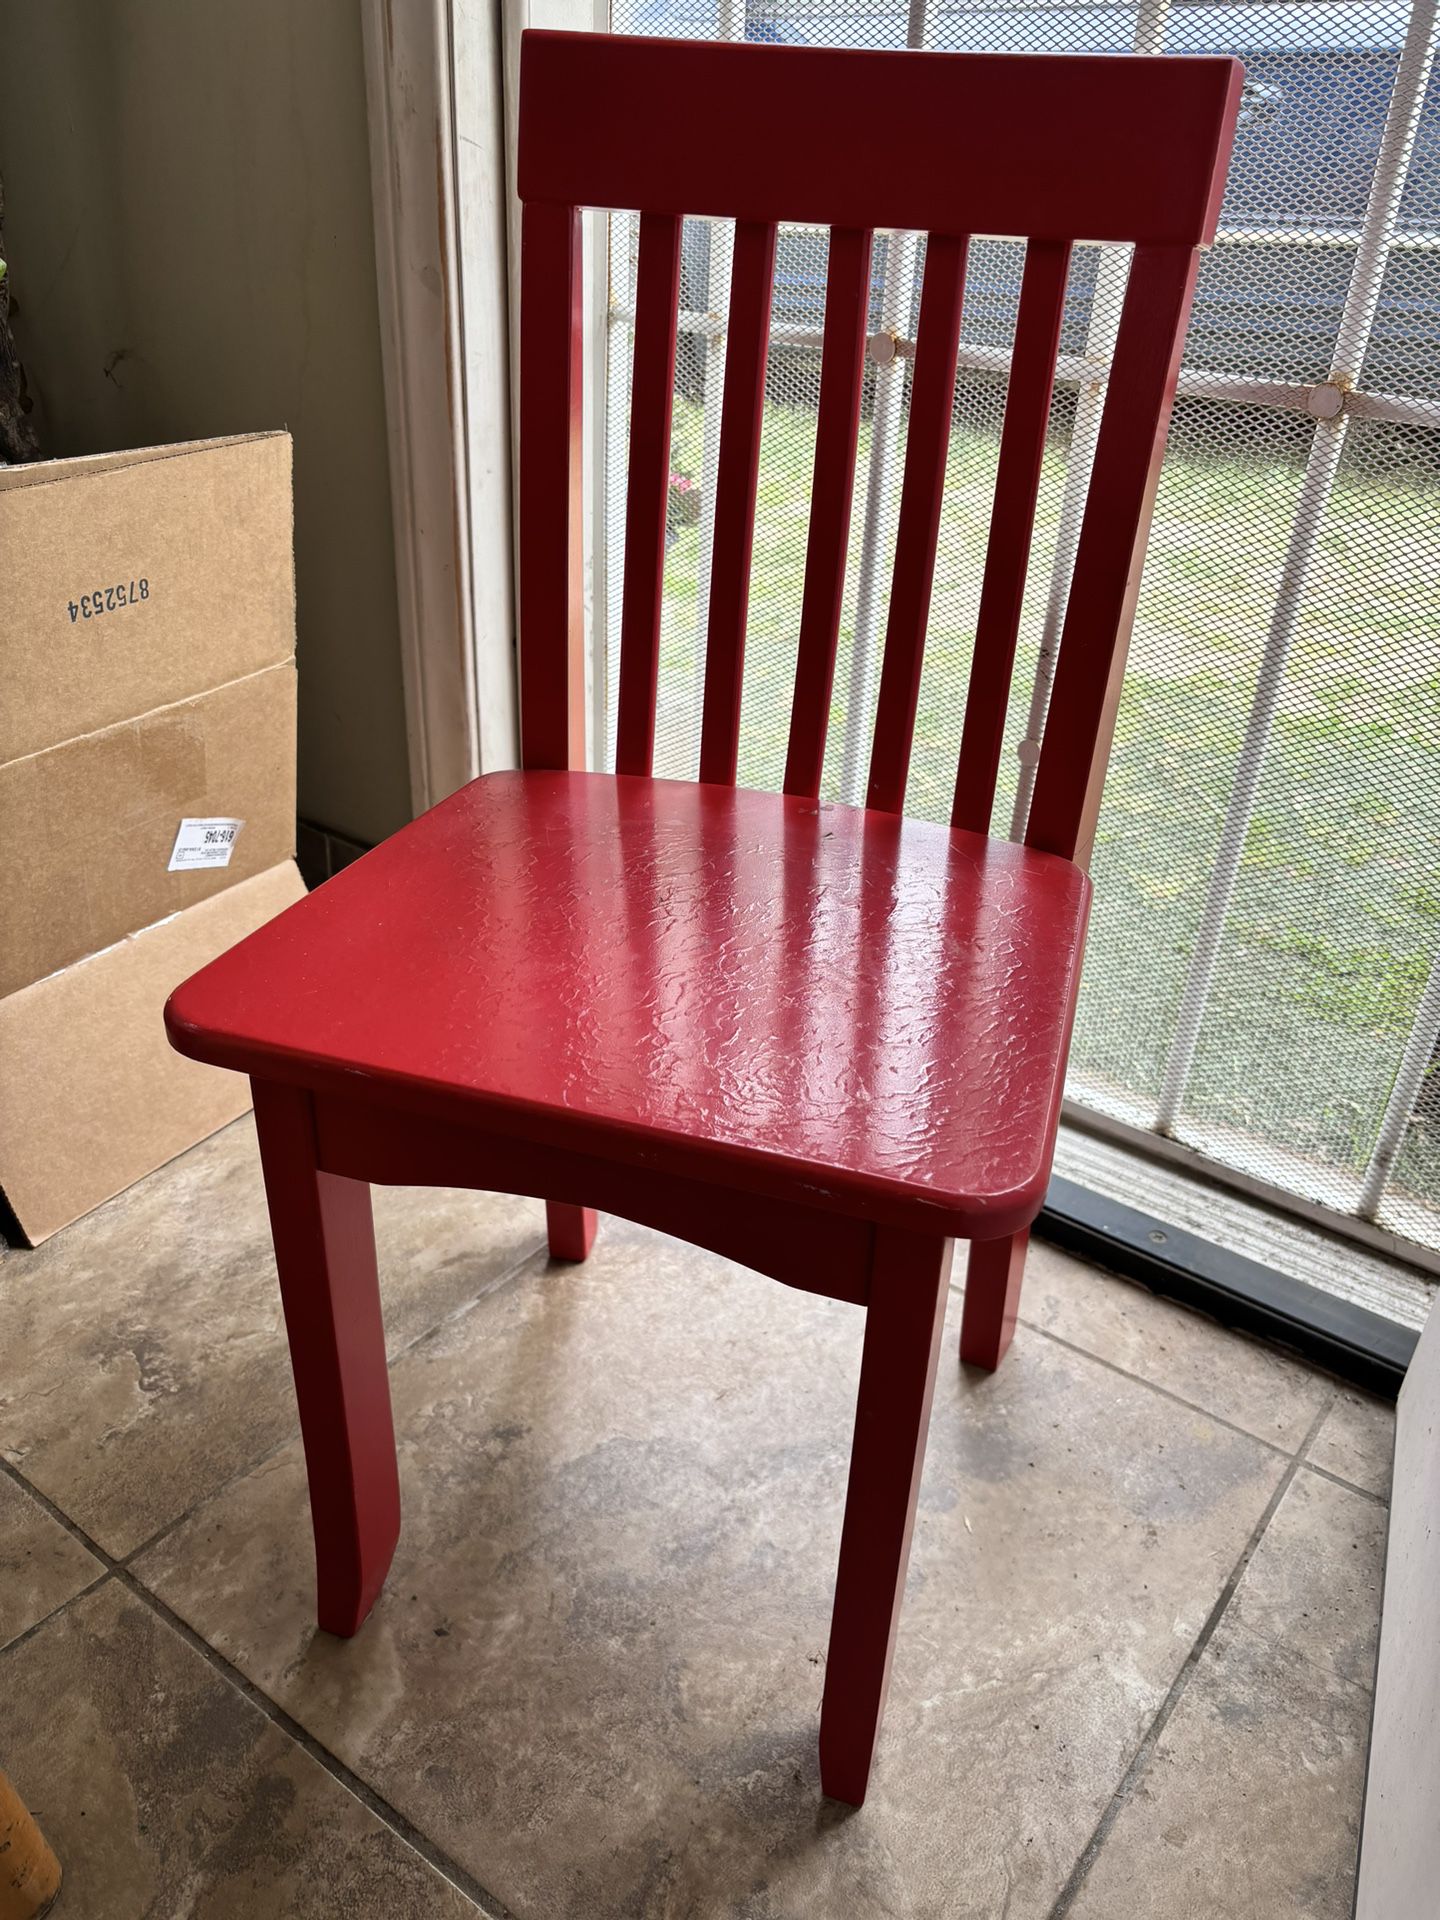 Little red Chair $10 OBO